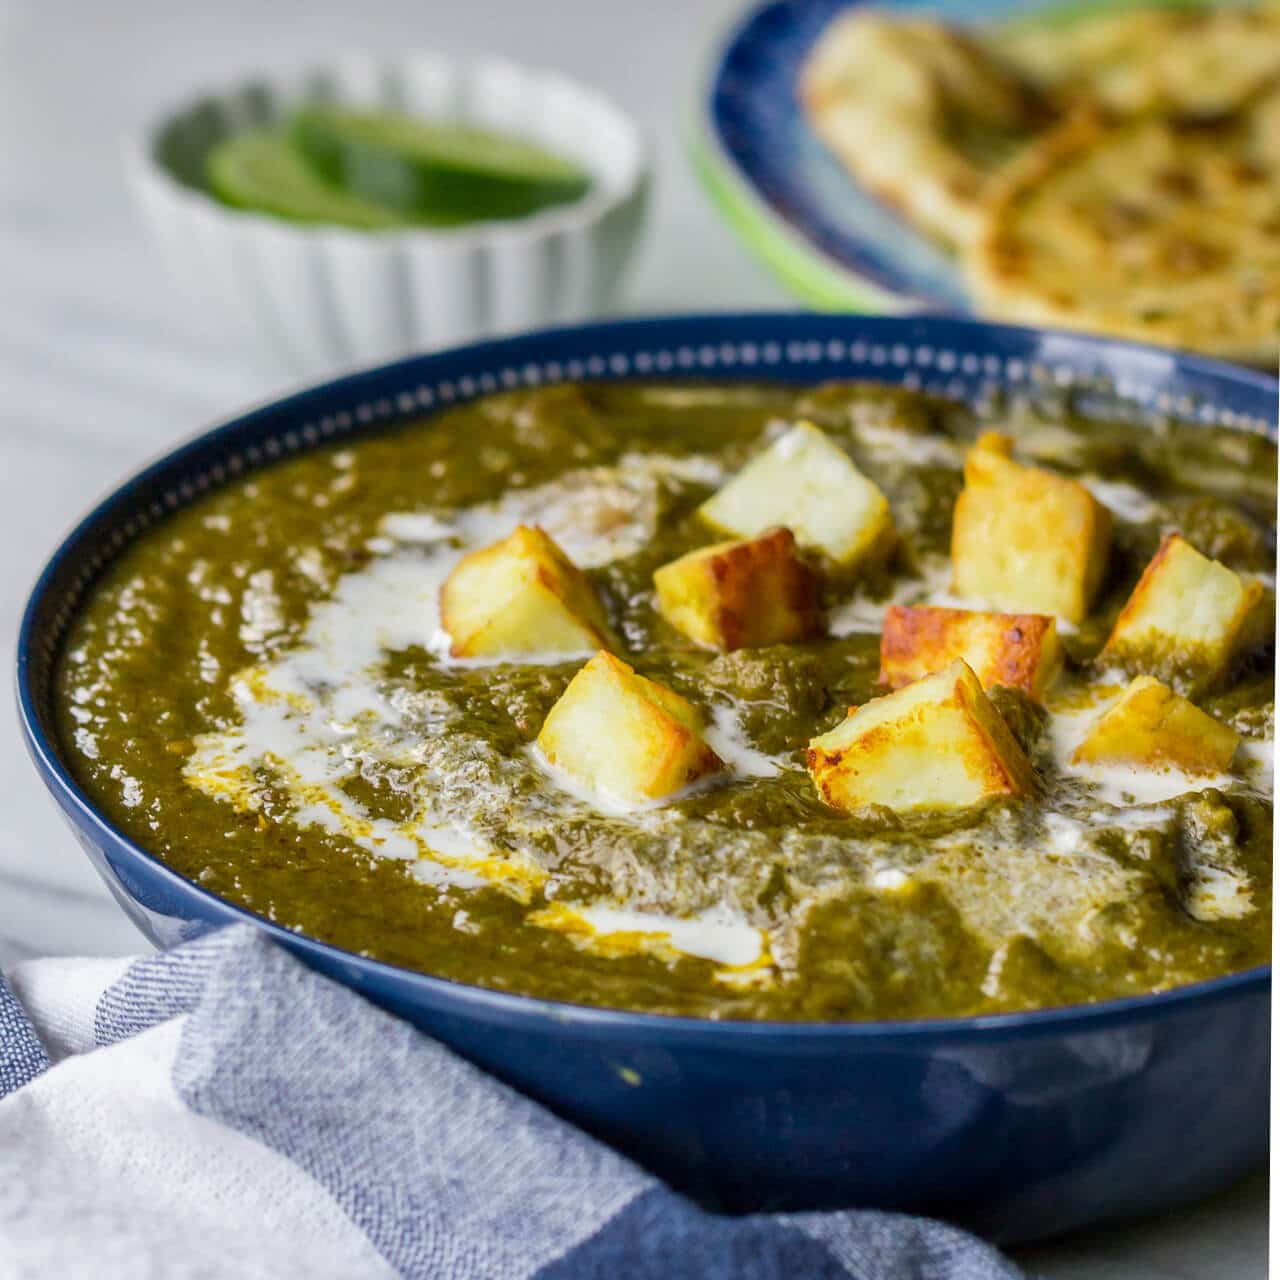 Restaurant style Saag / Palak Paneer (spinach and cottage cheese)